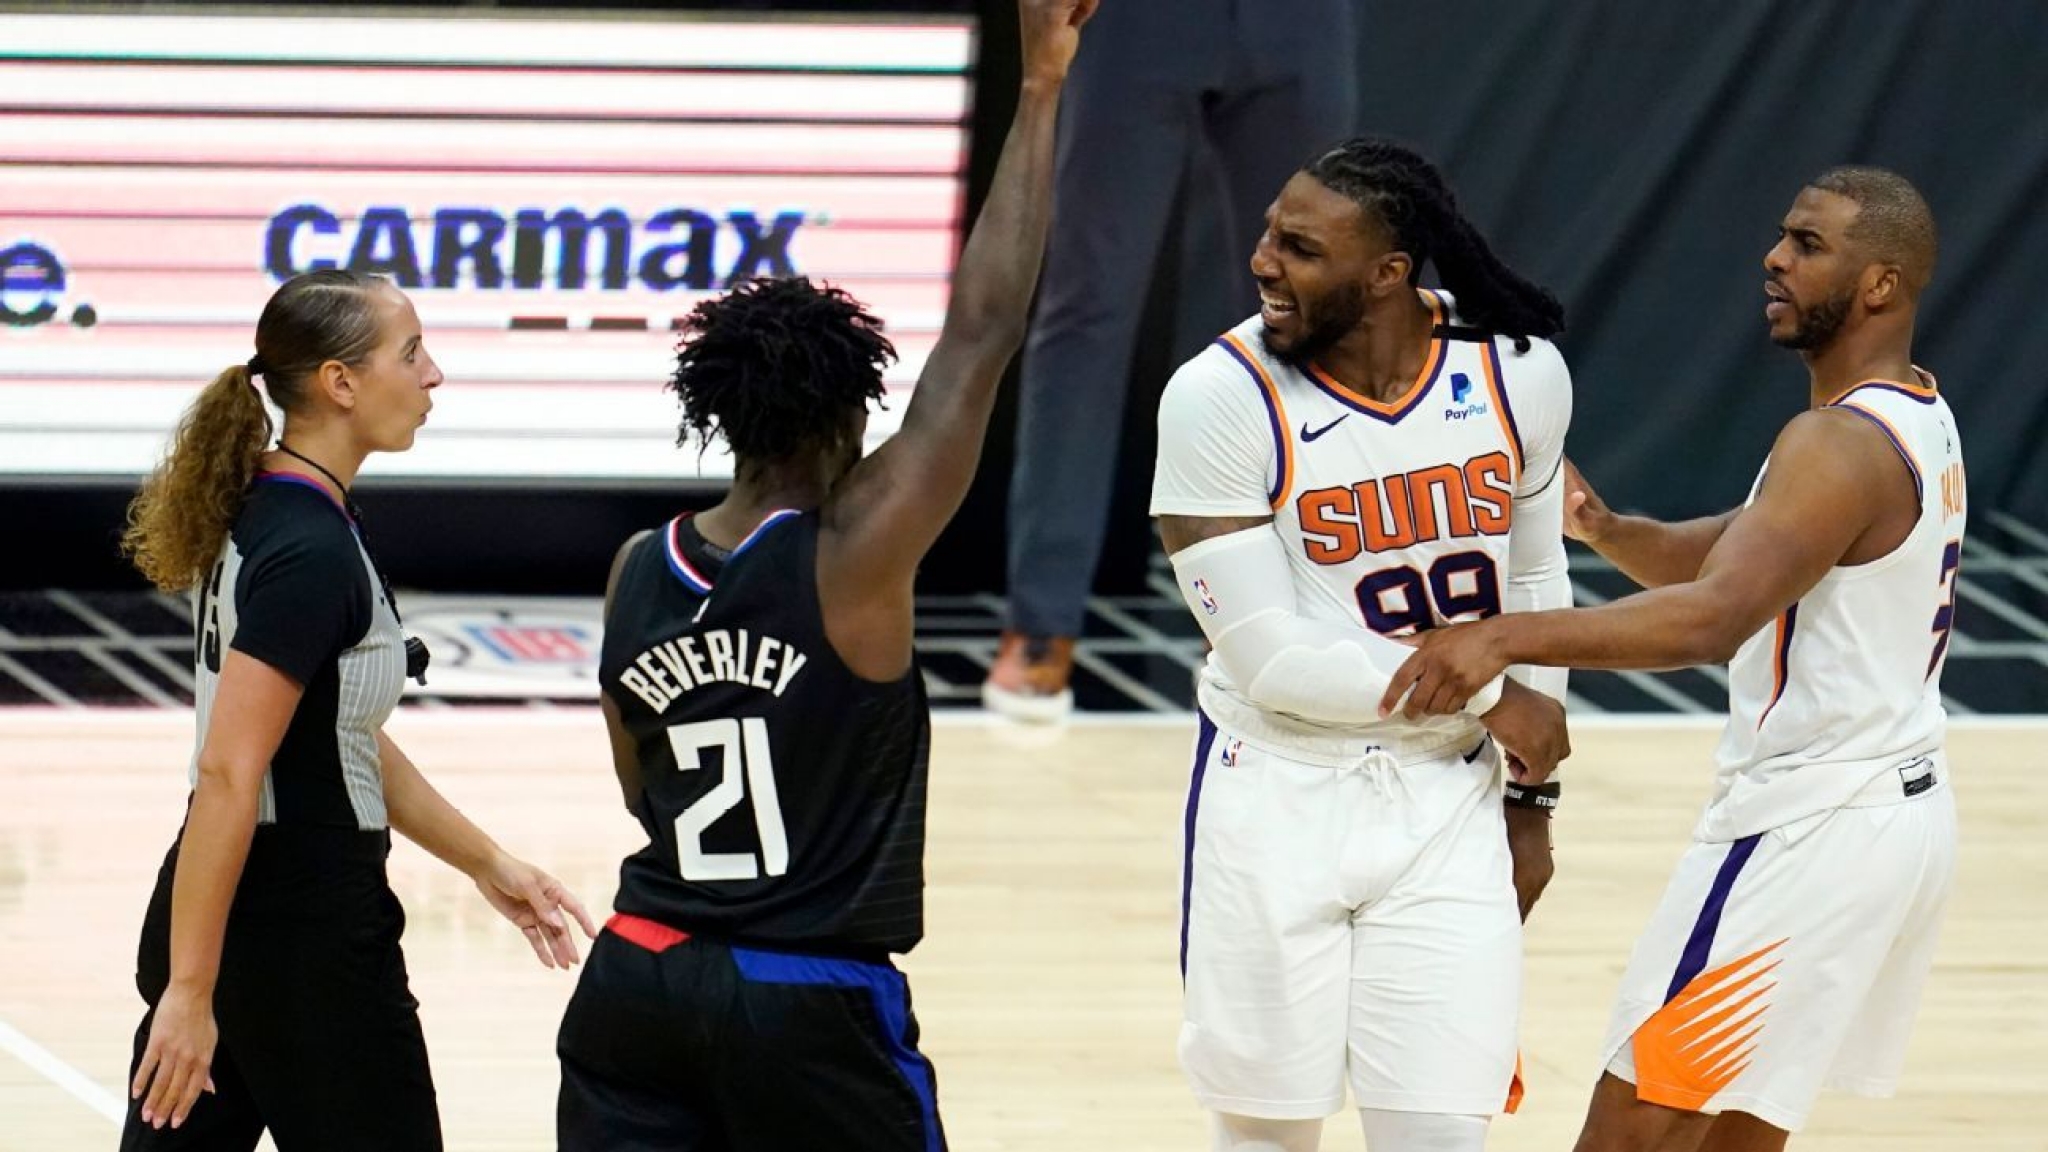 George lets Suns ‘do the chirping’ as Clips win